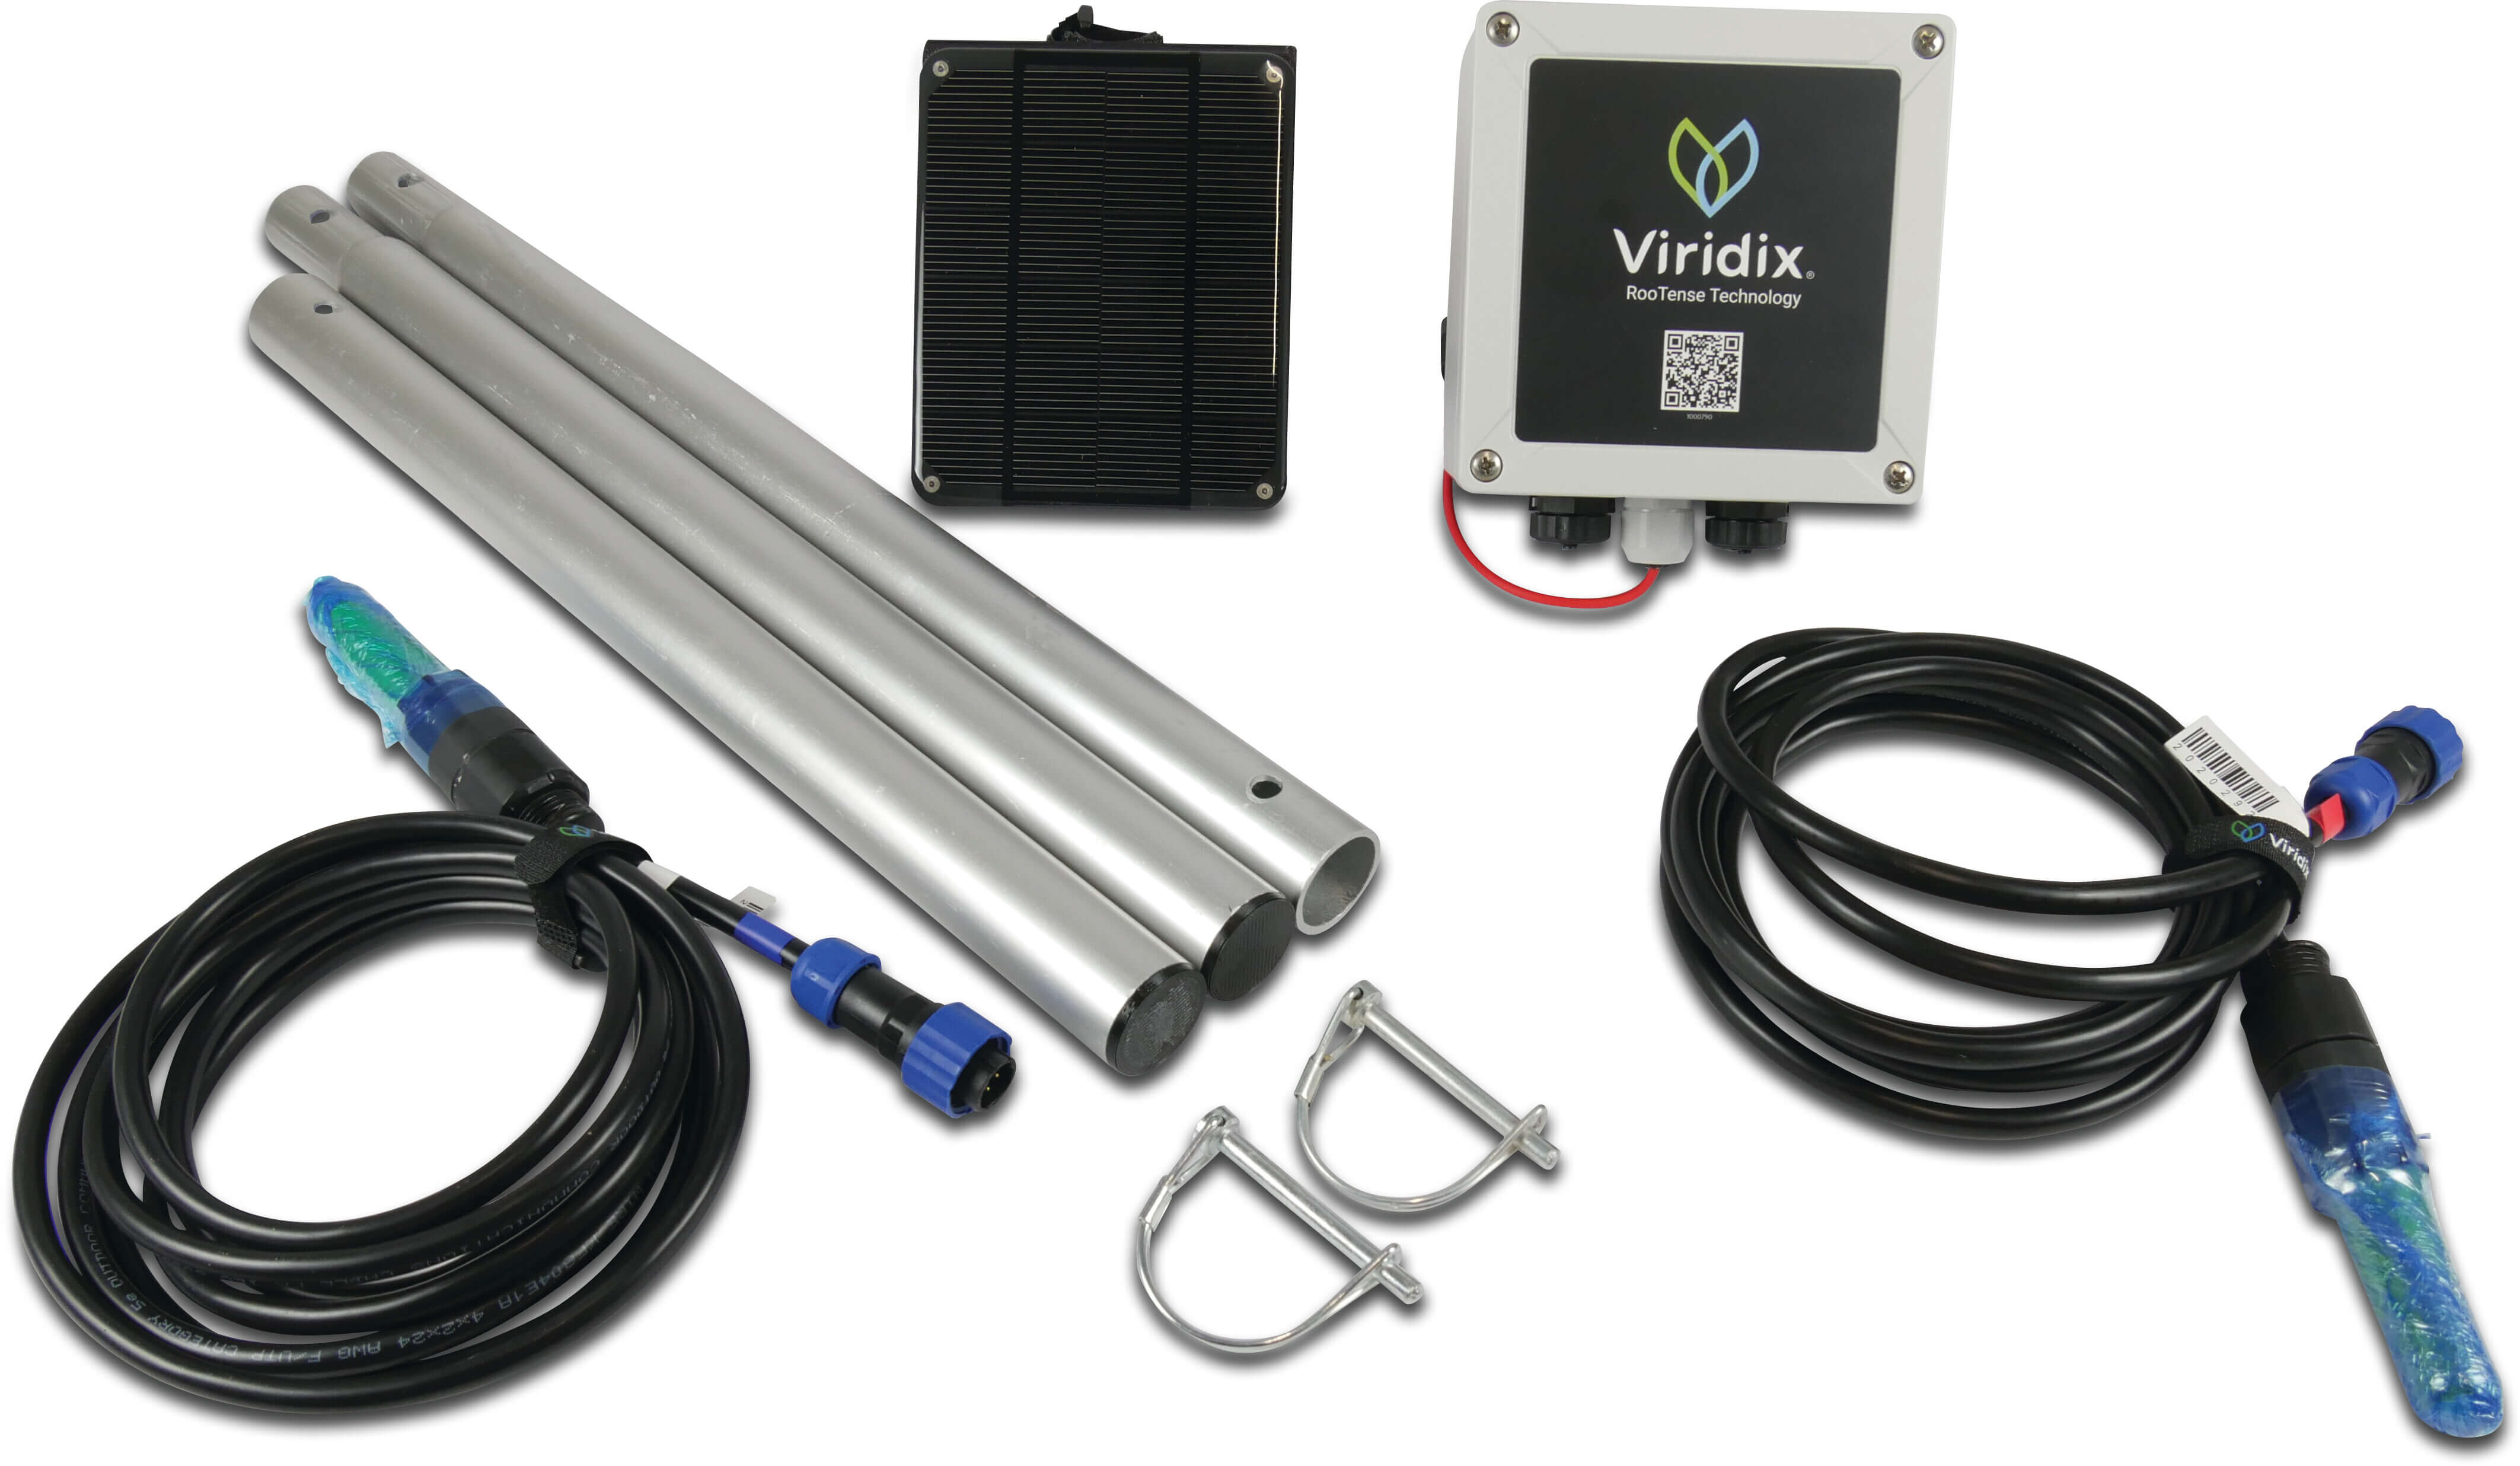 Viridix Gen3 system, including lot device, 2 Rootsense sensors, installation kit and 1-year subscription type Rootense 2 sensors